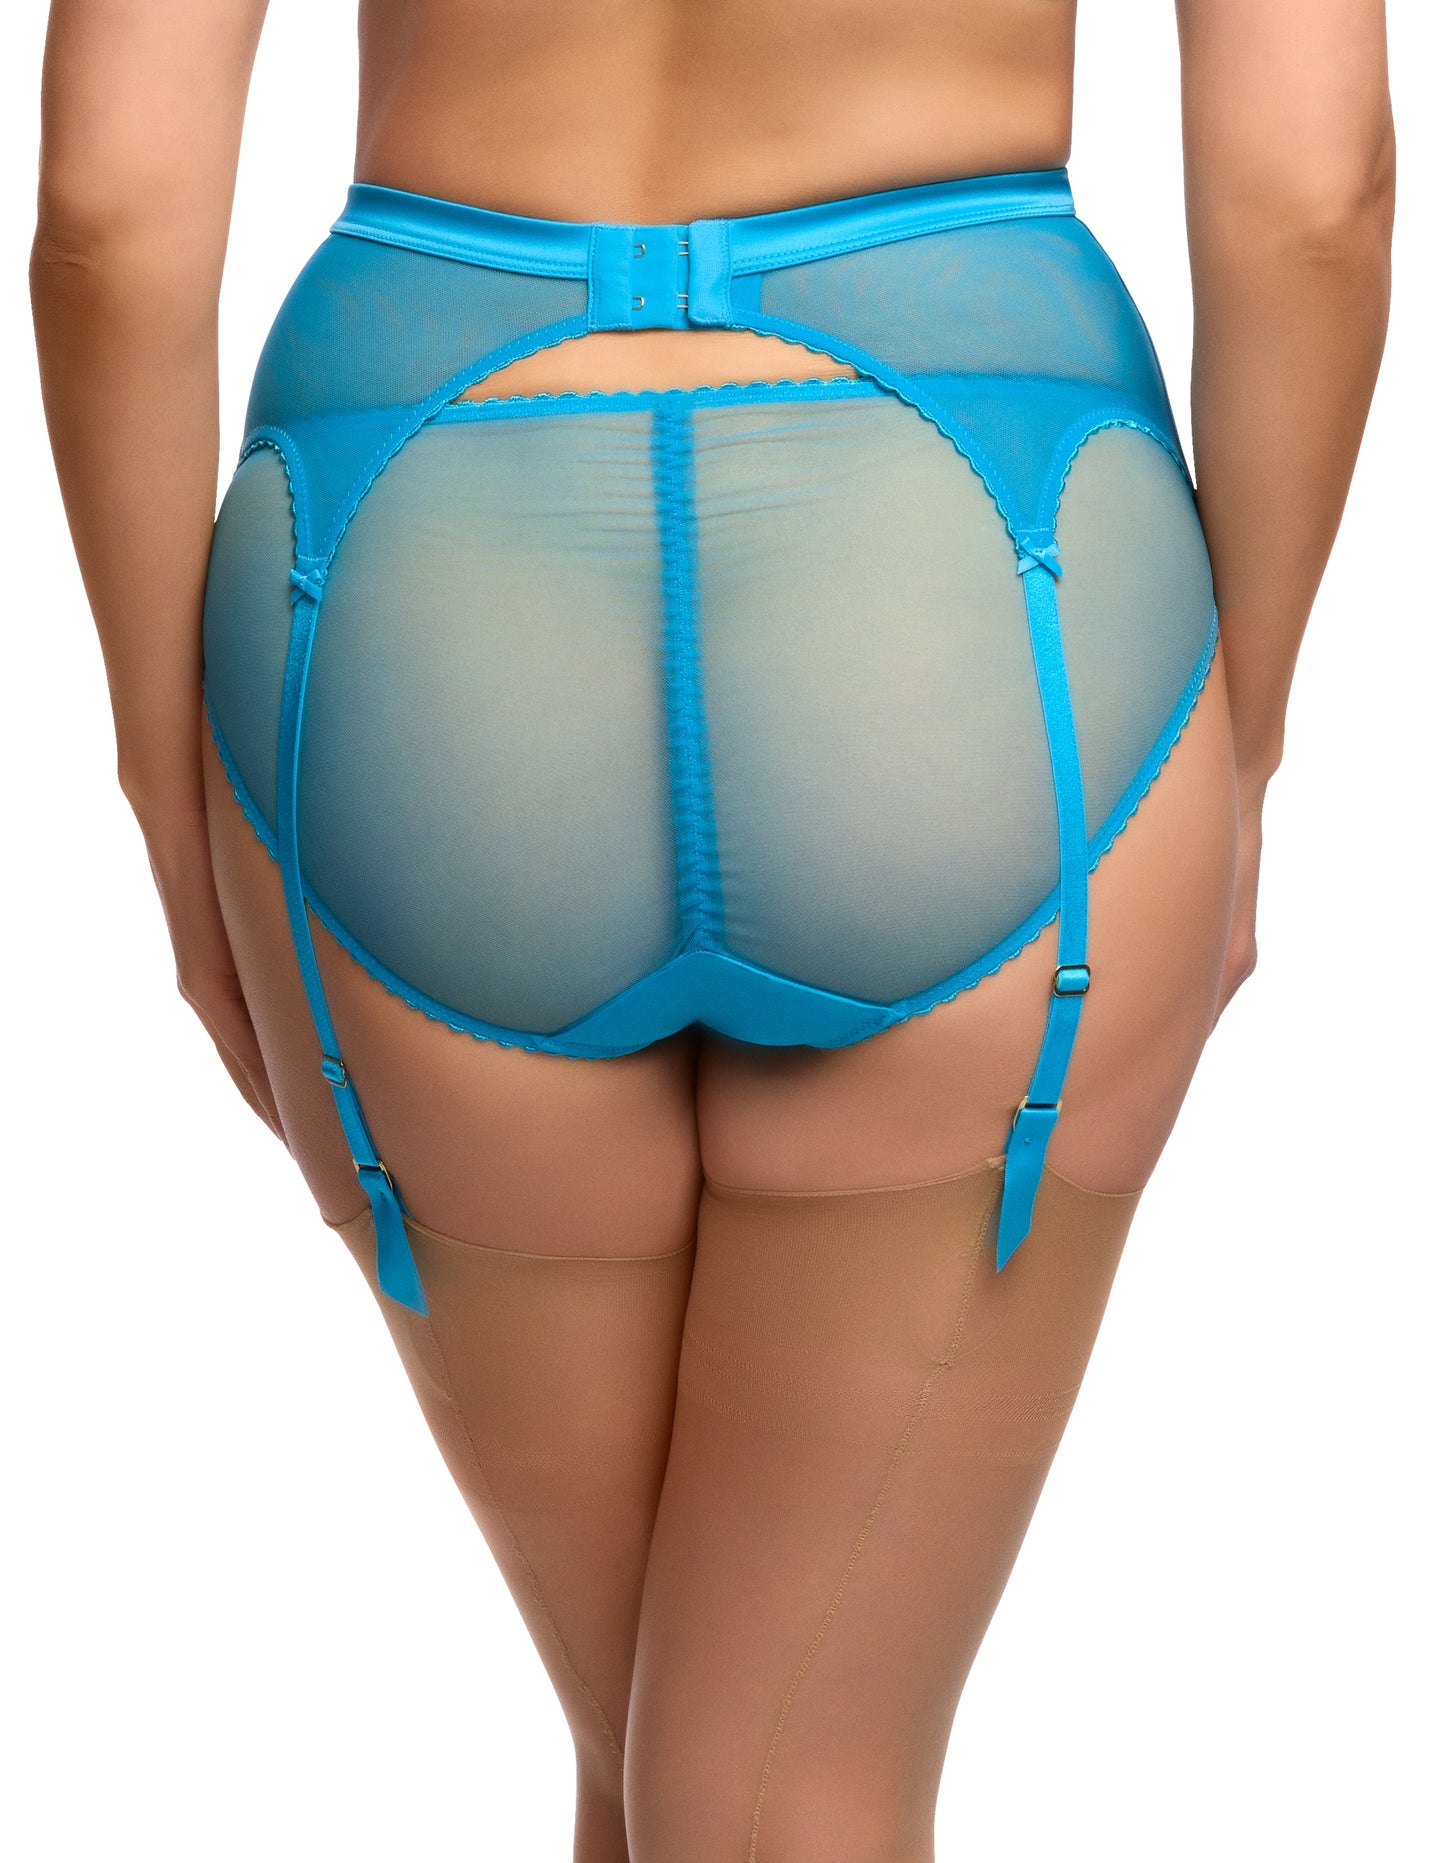 Julie's Roses Six Strap Suspender Belt in Butterfly Blue By Dita Von Teese - sizes XS - 4X